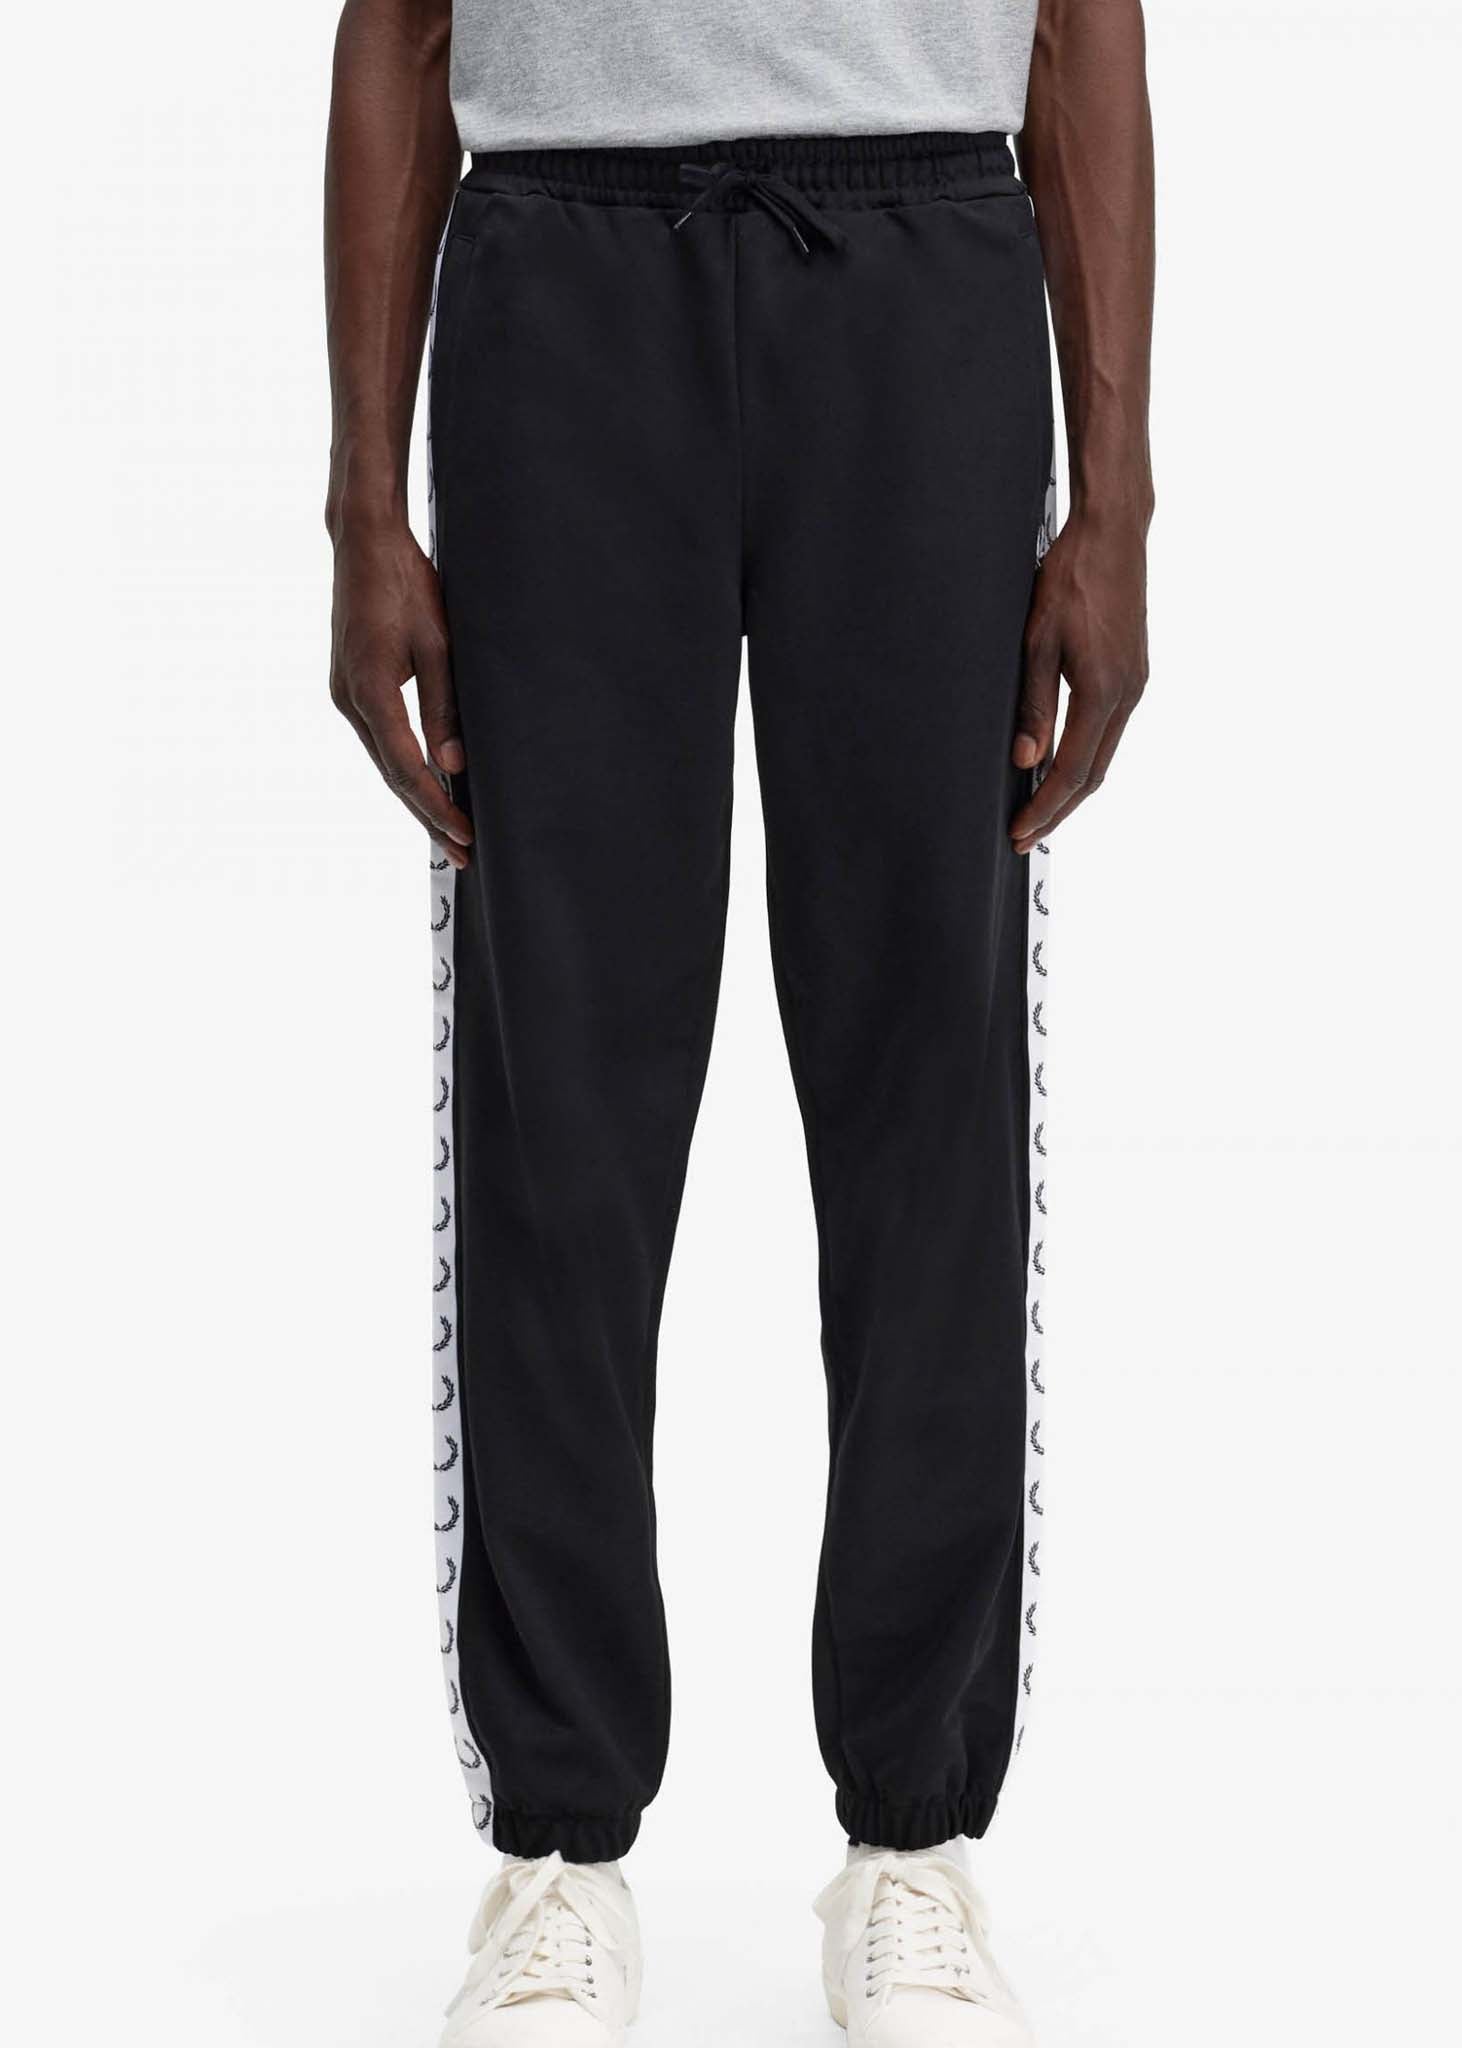 Fred Perry track pant black